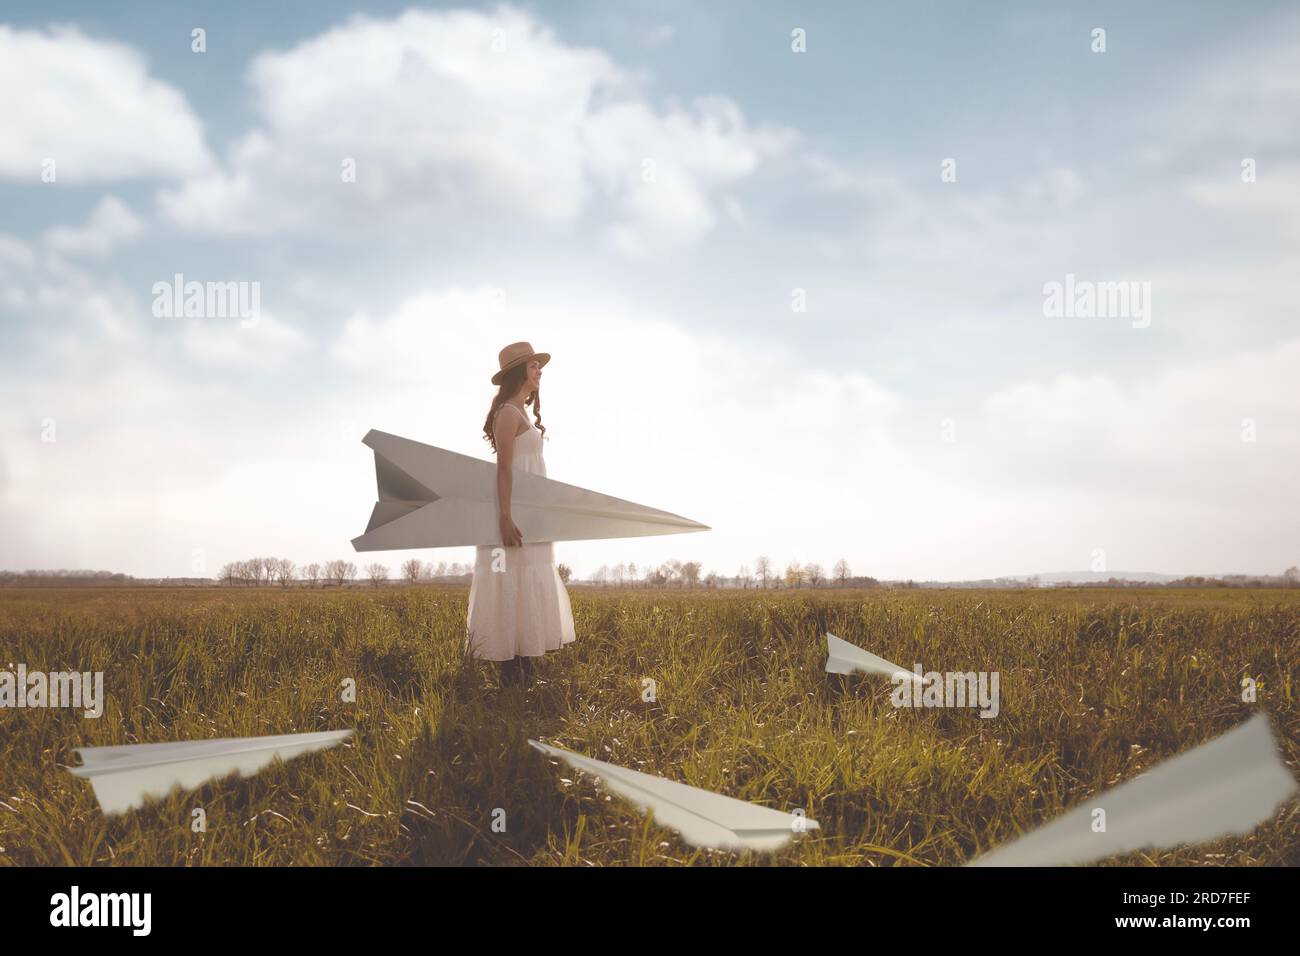 surreal woman surrounded by giant paper airplanes; abstract concept Stock Photo